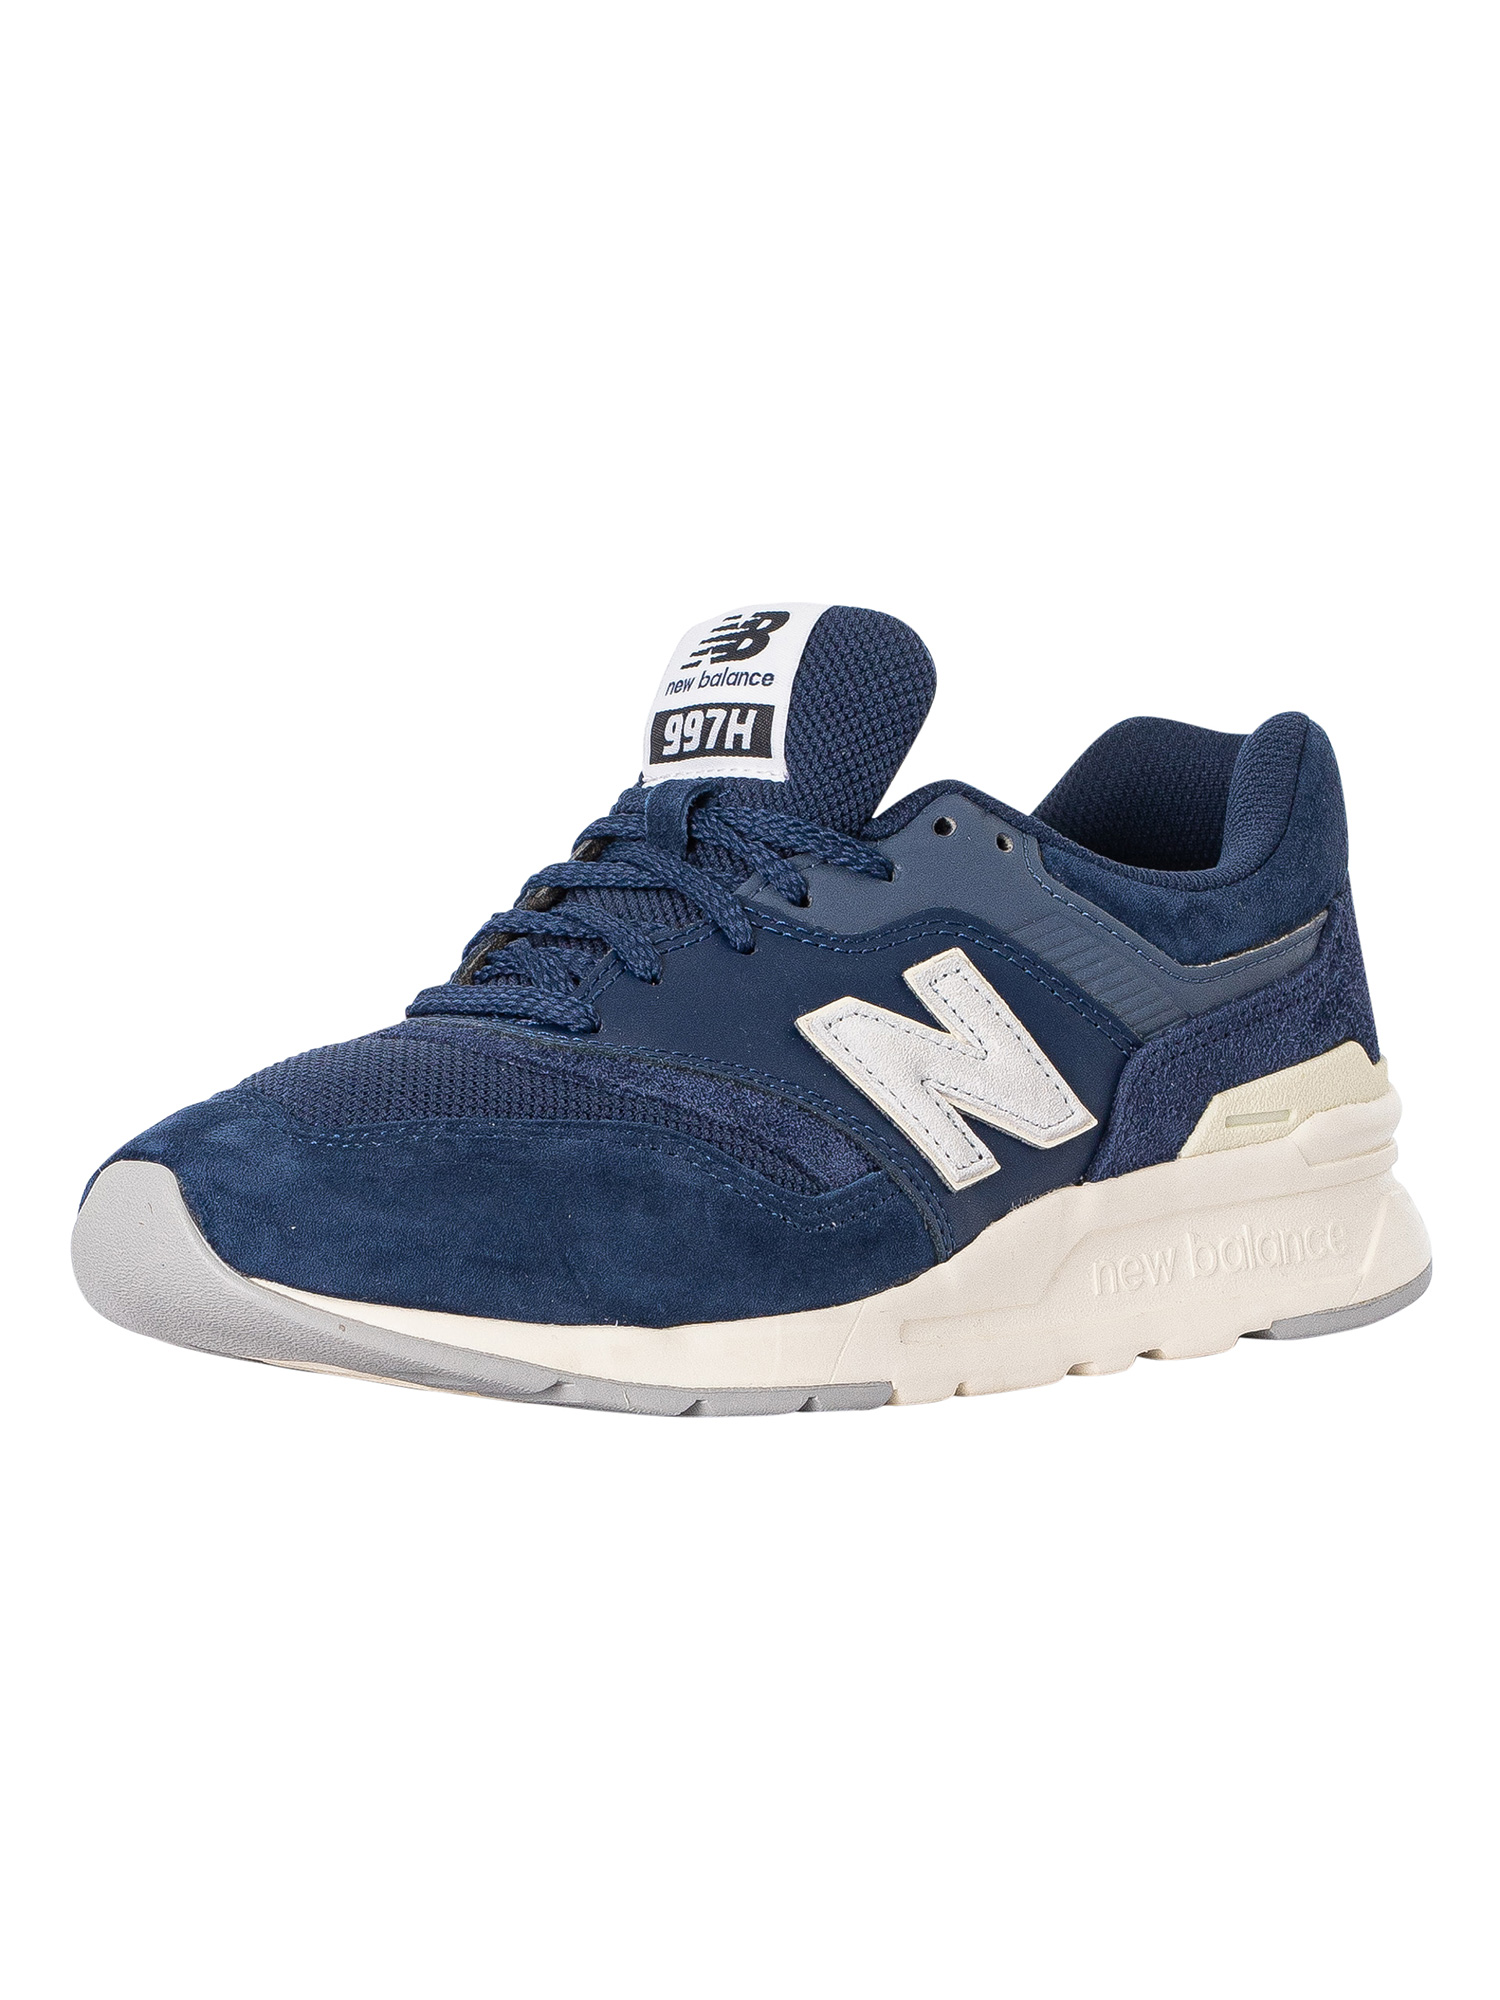 997H Suede Trainers product